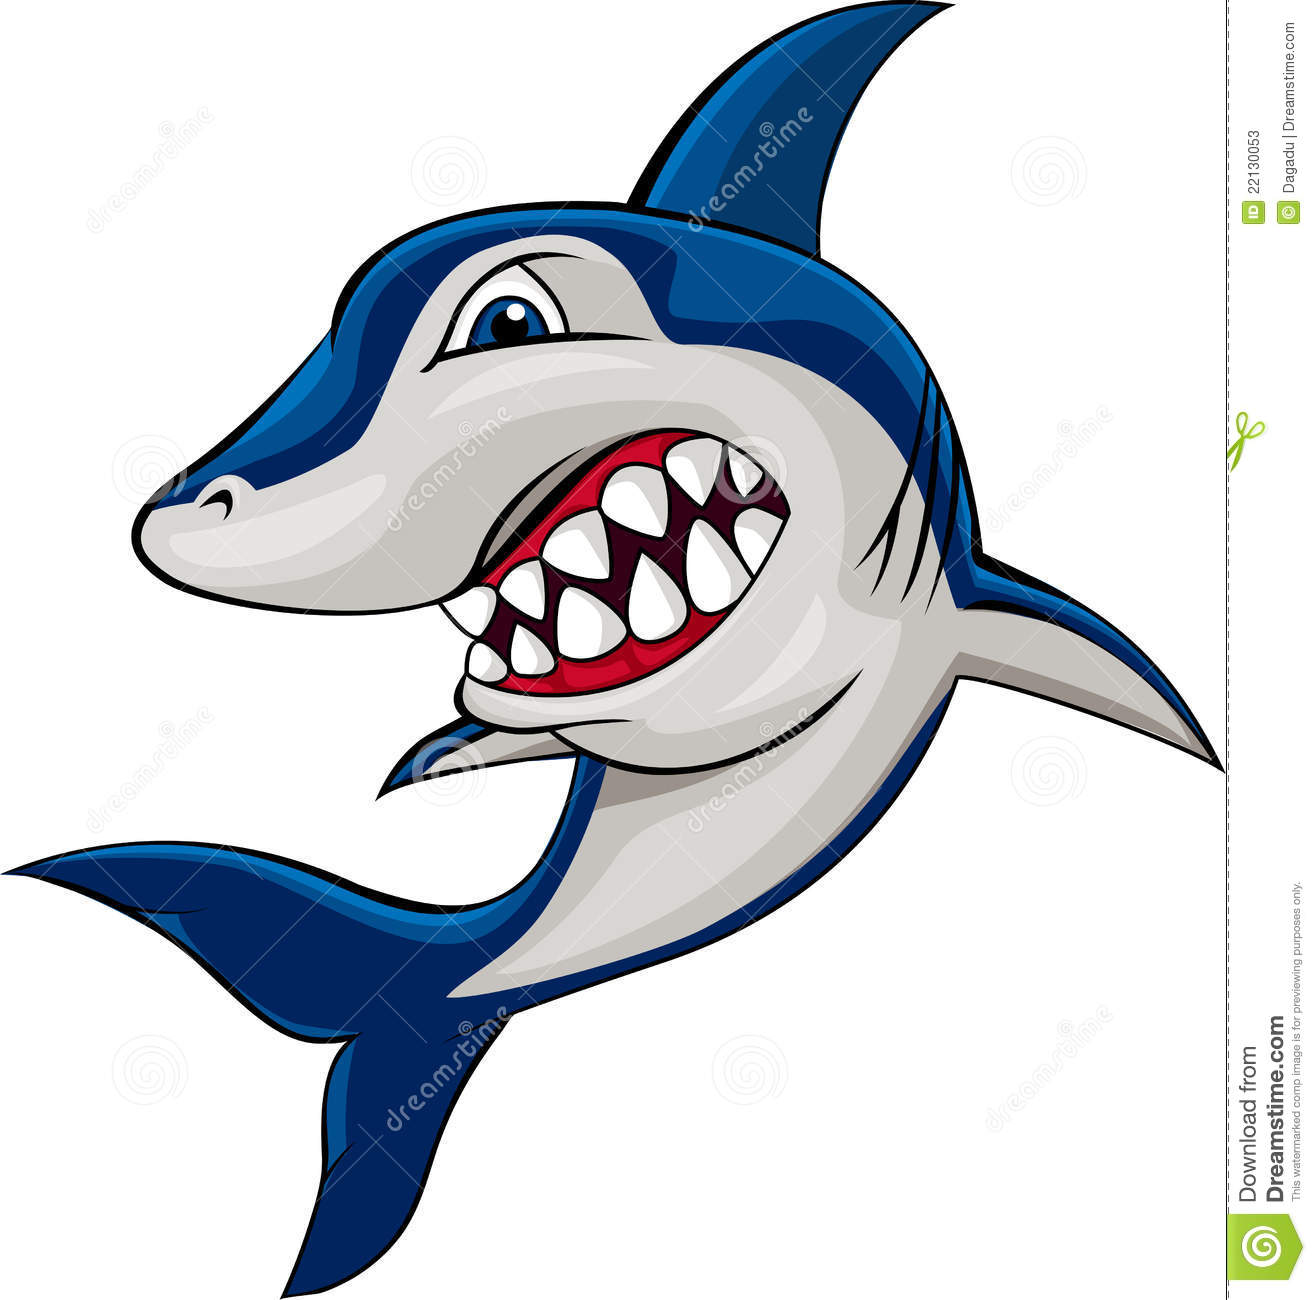 Shark Clipart. Use These Free Images For Your Websites Art Projects Reports And